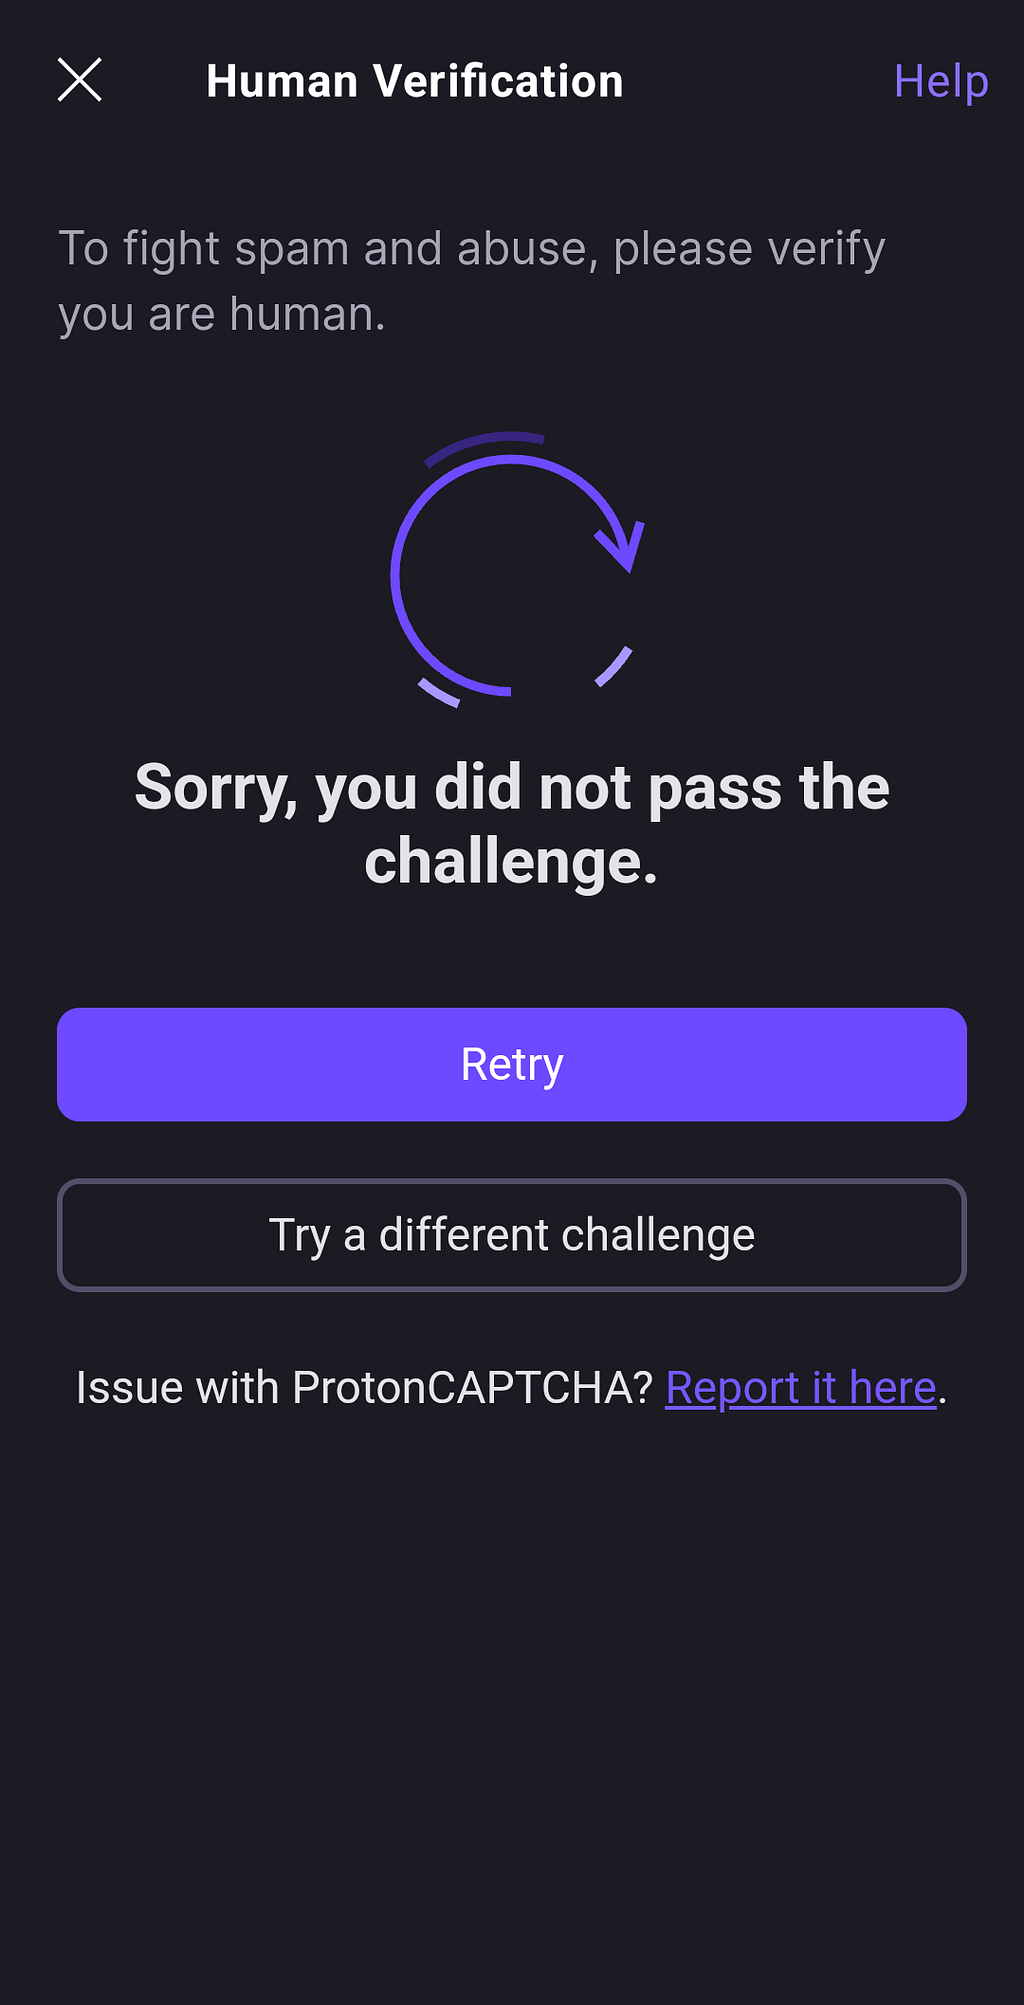 UI that reads: Human Verification — To fight spam and abuse, please verify you are human. Sorry, you did not pass the challenge. There are two buttons “Retry” and “Try a different challenge”. Below is a link that says “Issue with ProtonCAPTCHA? Report it here.”